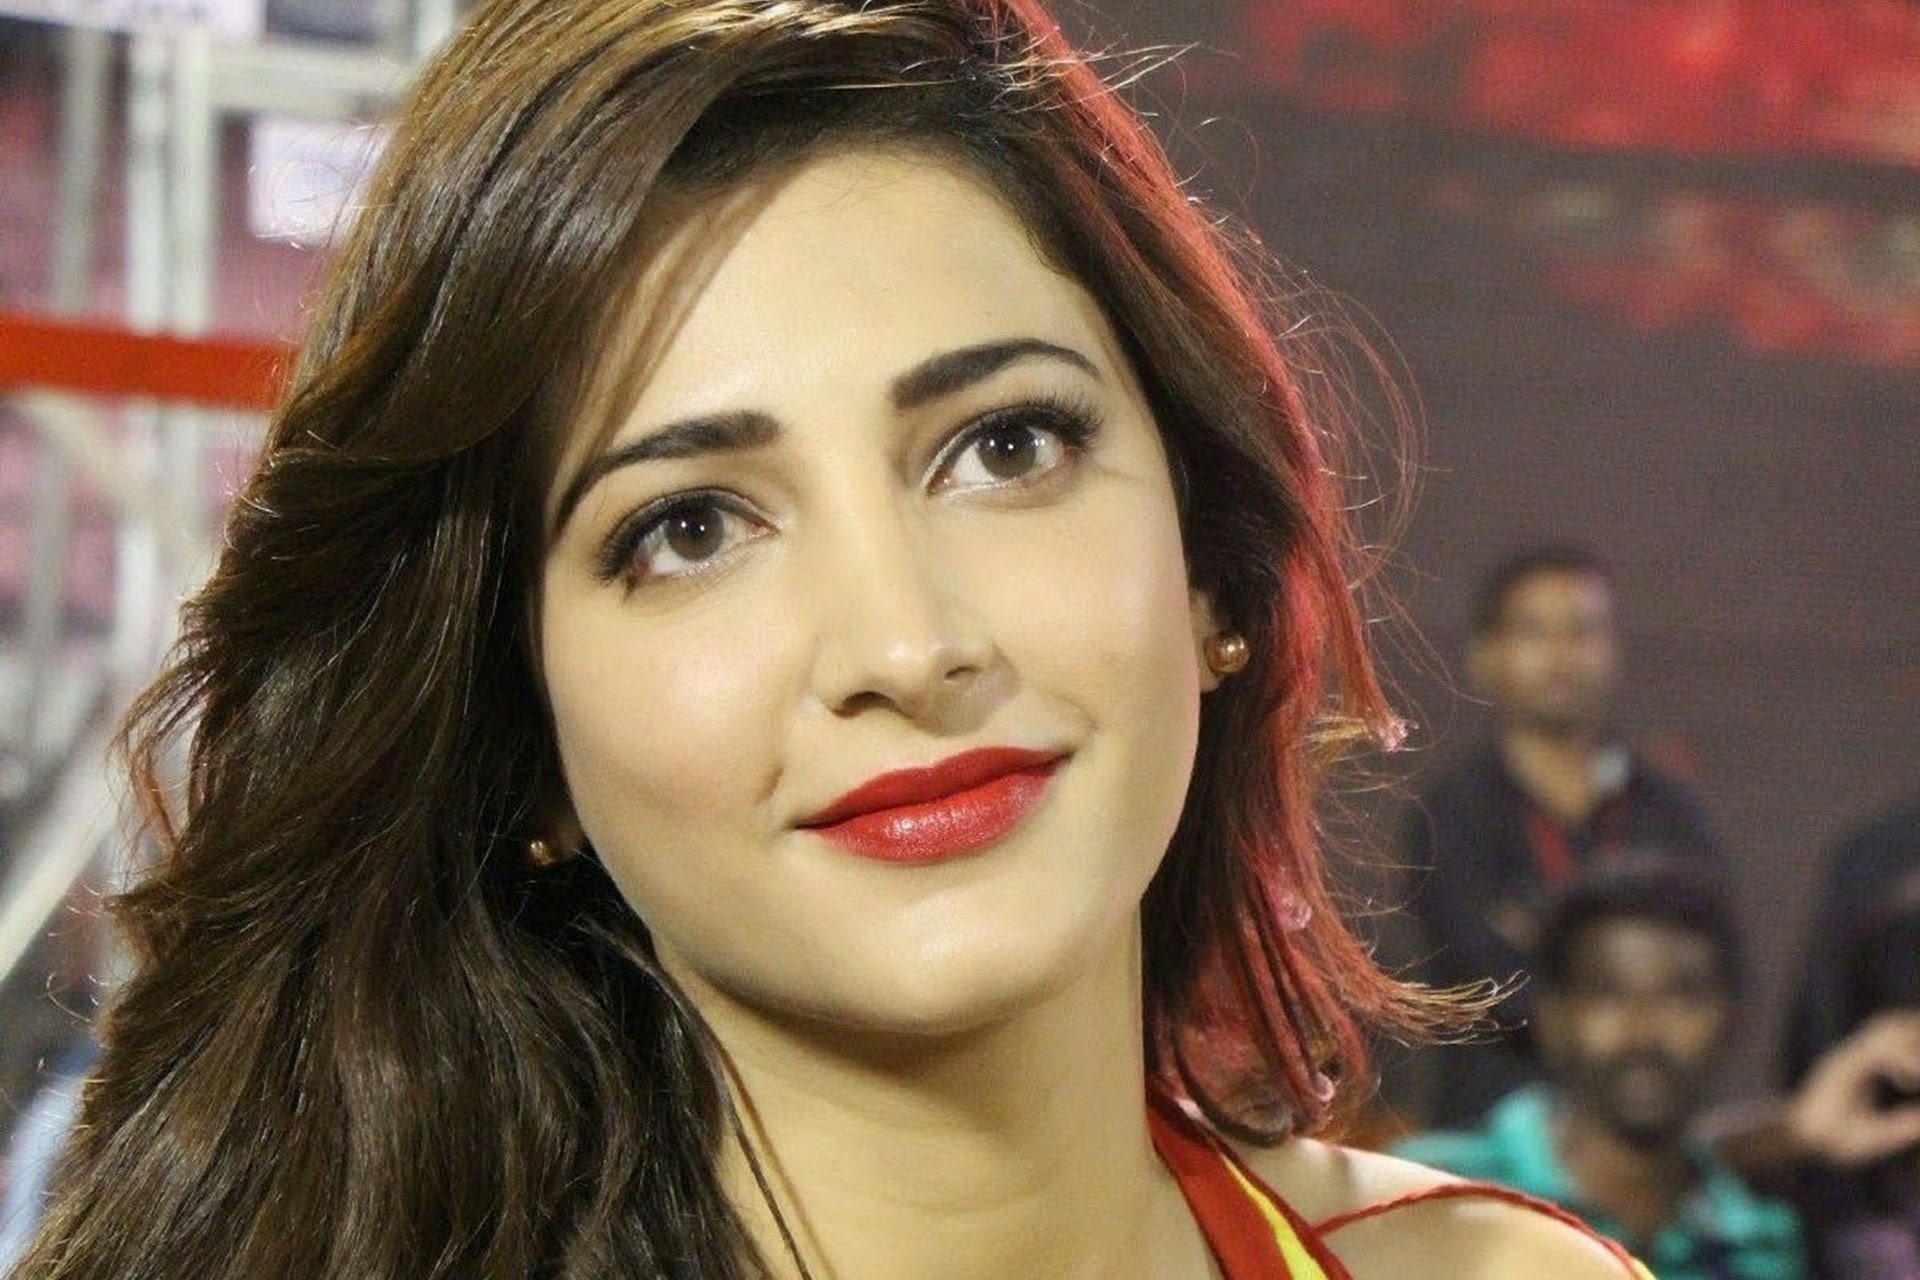 Lesser known facts about Shruti Haasan